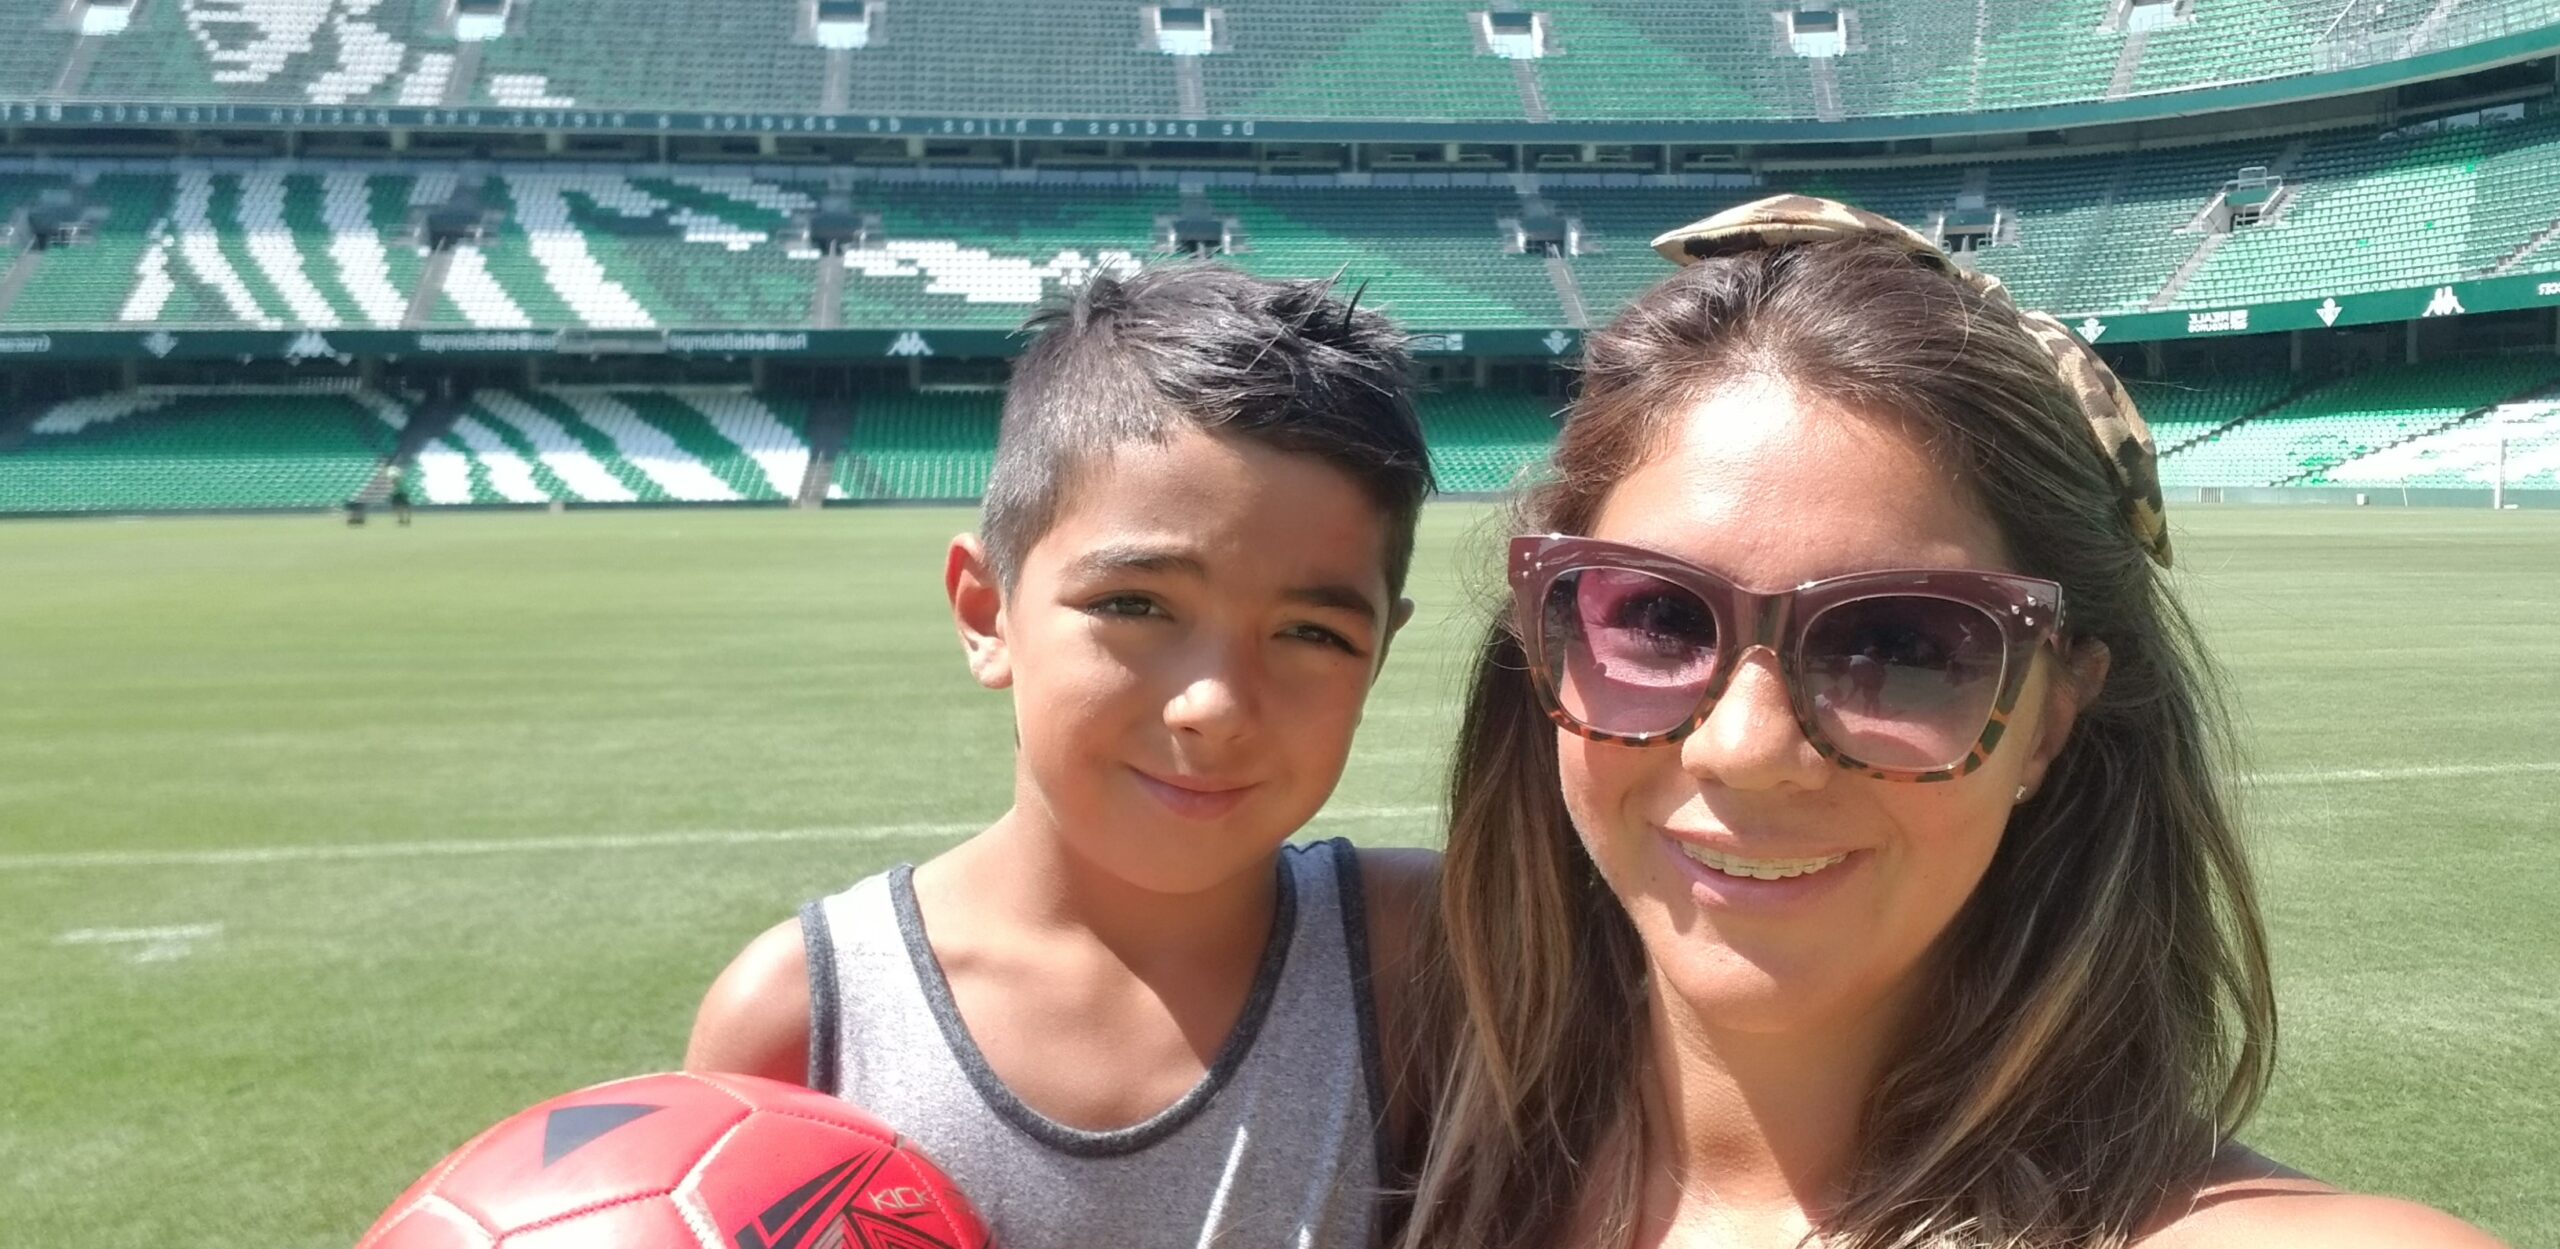 Mom Dalila with her son in a baseball stadium.